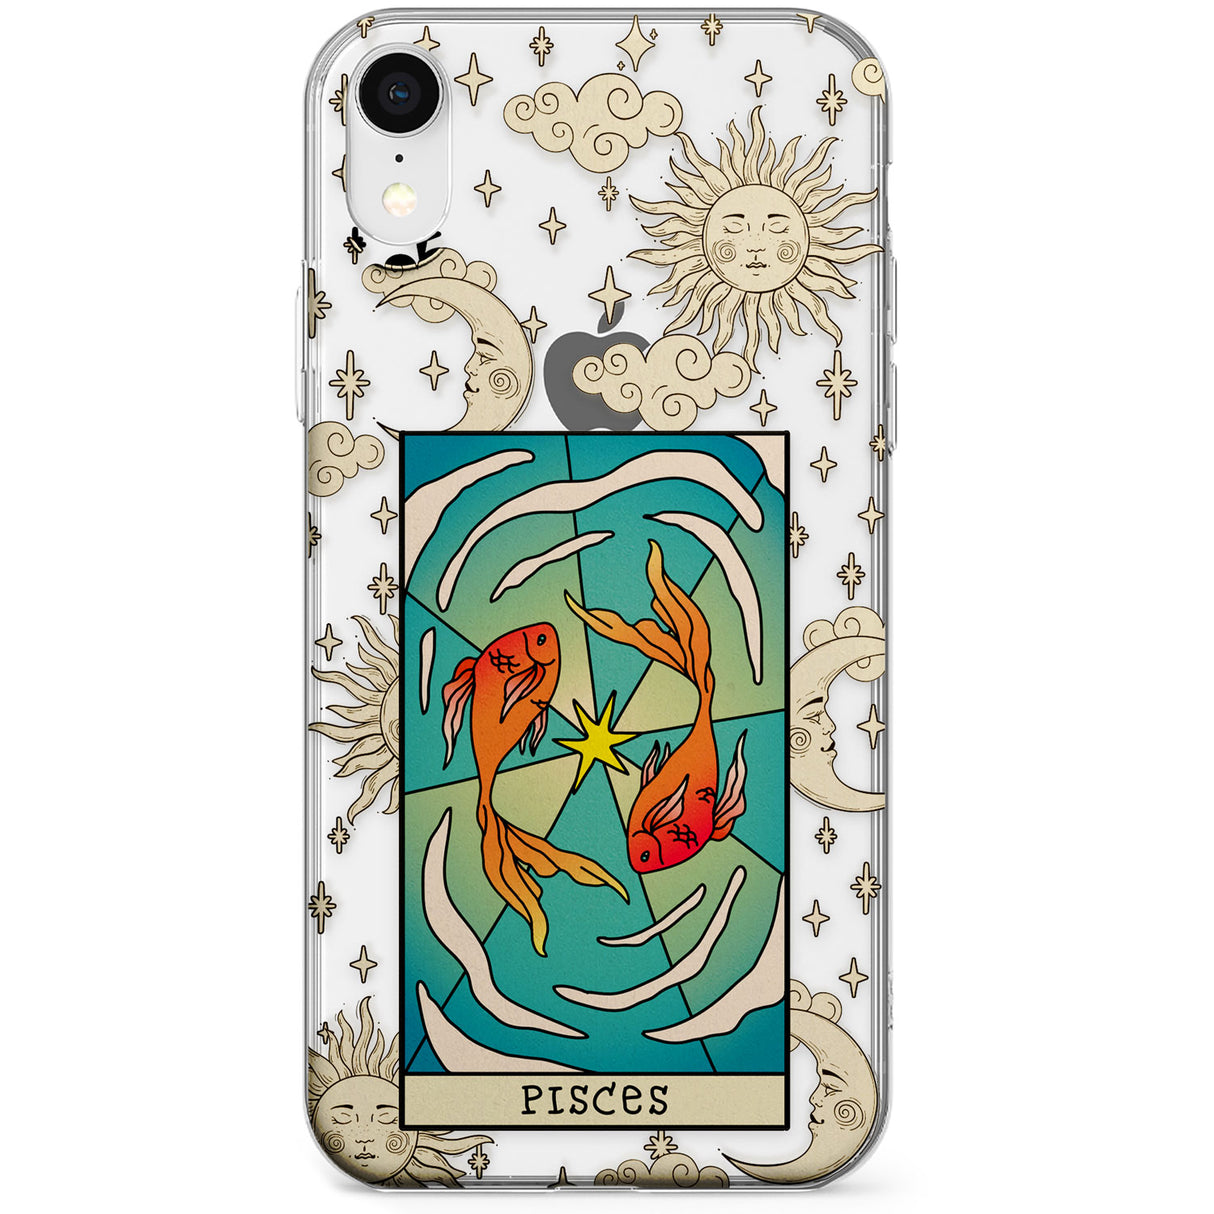 Celestial Zodiac - Pisces Phone Case for iPhone X, XS Max, XR